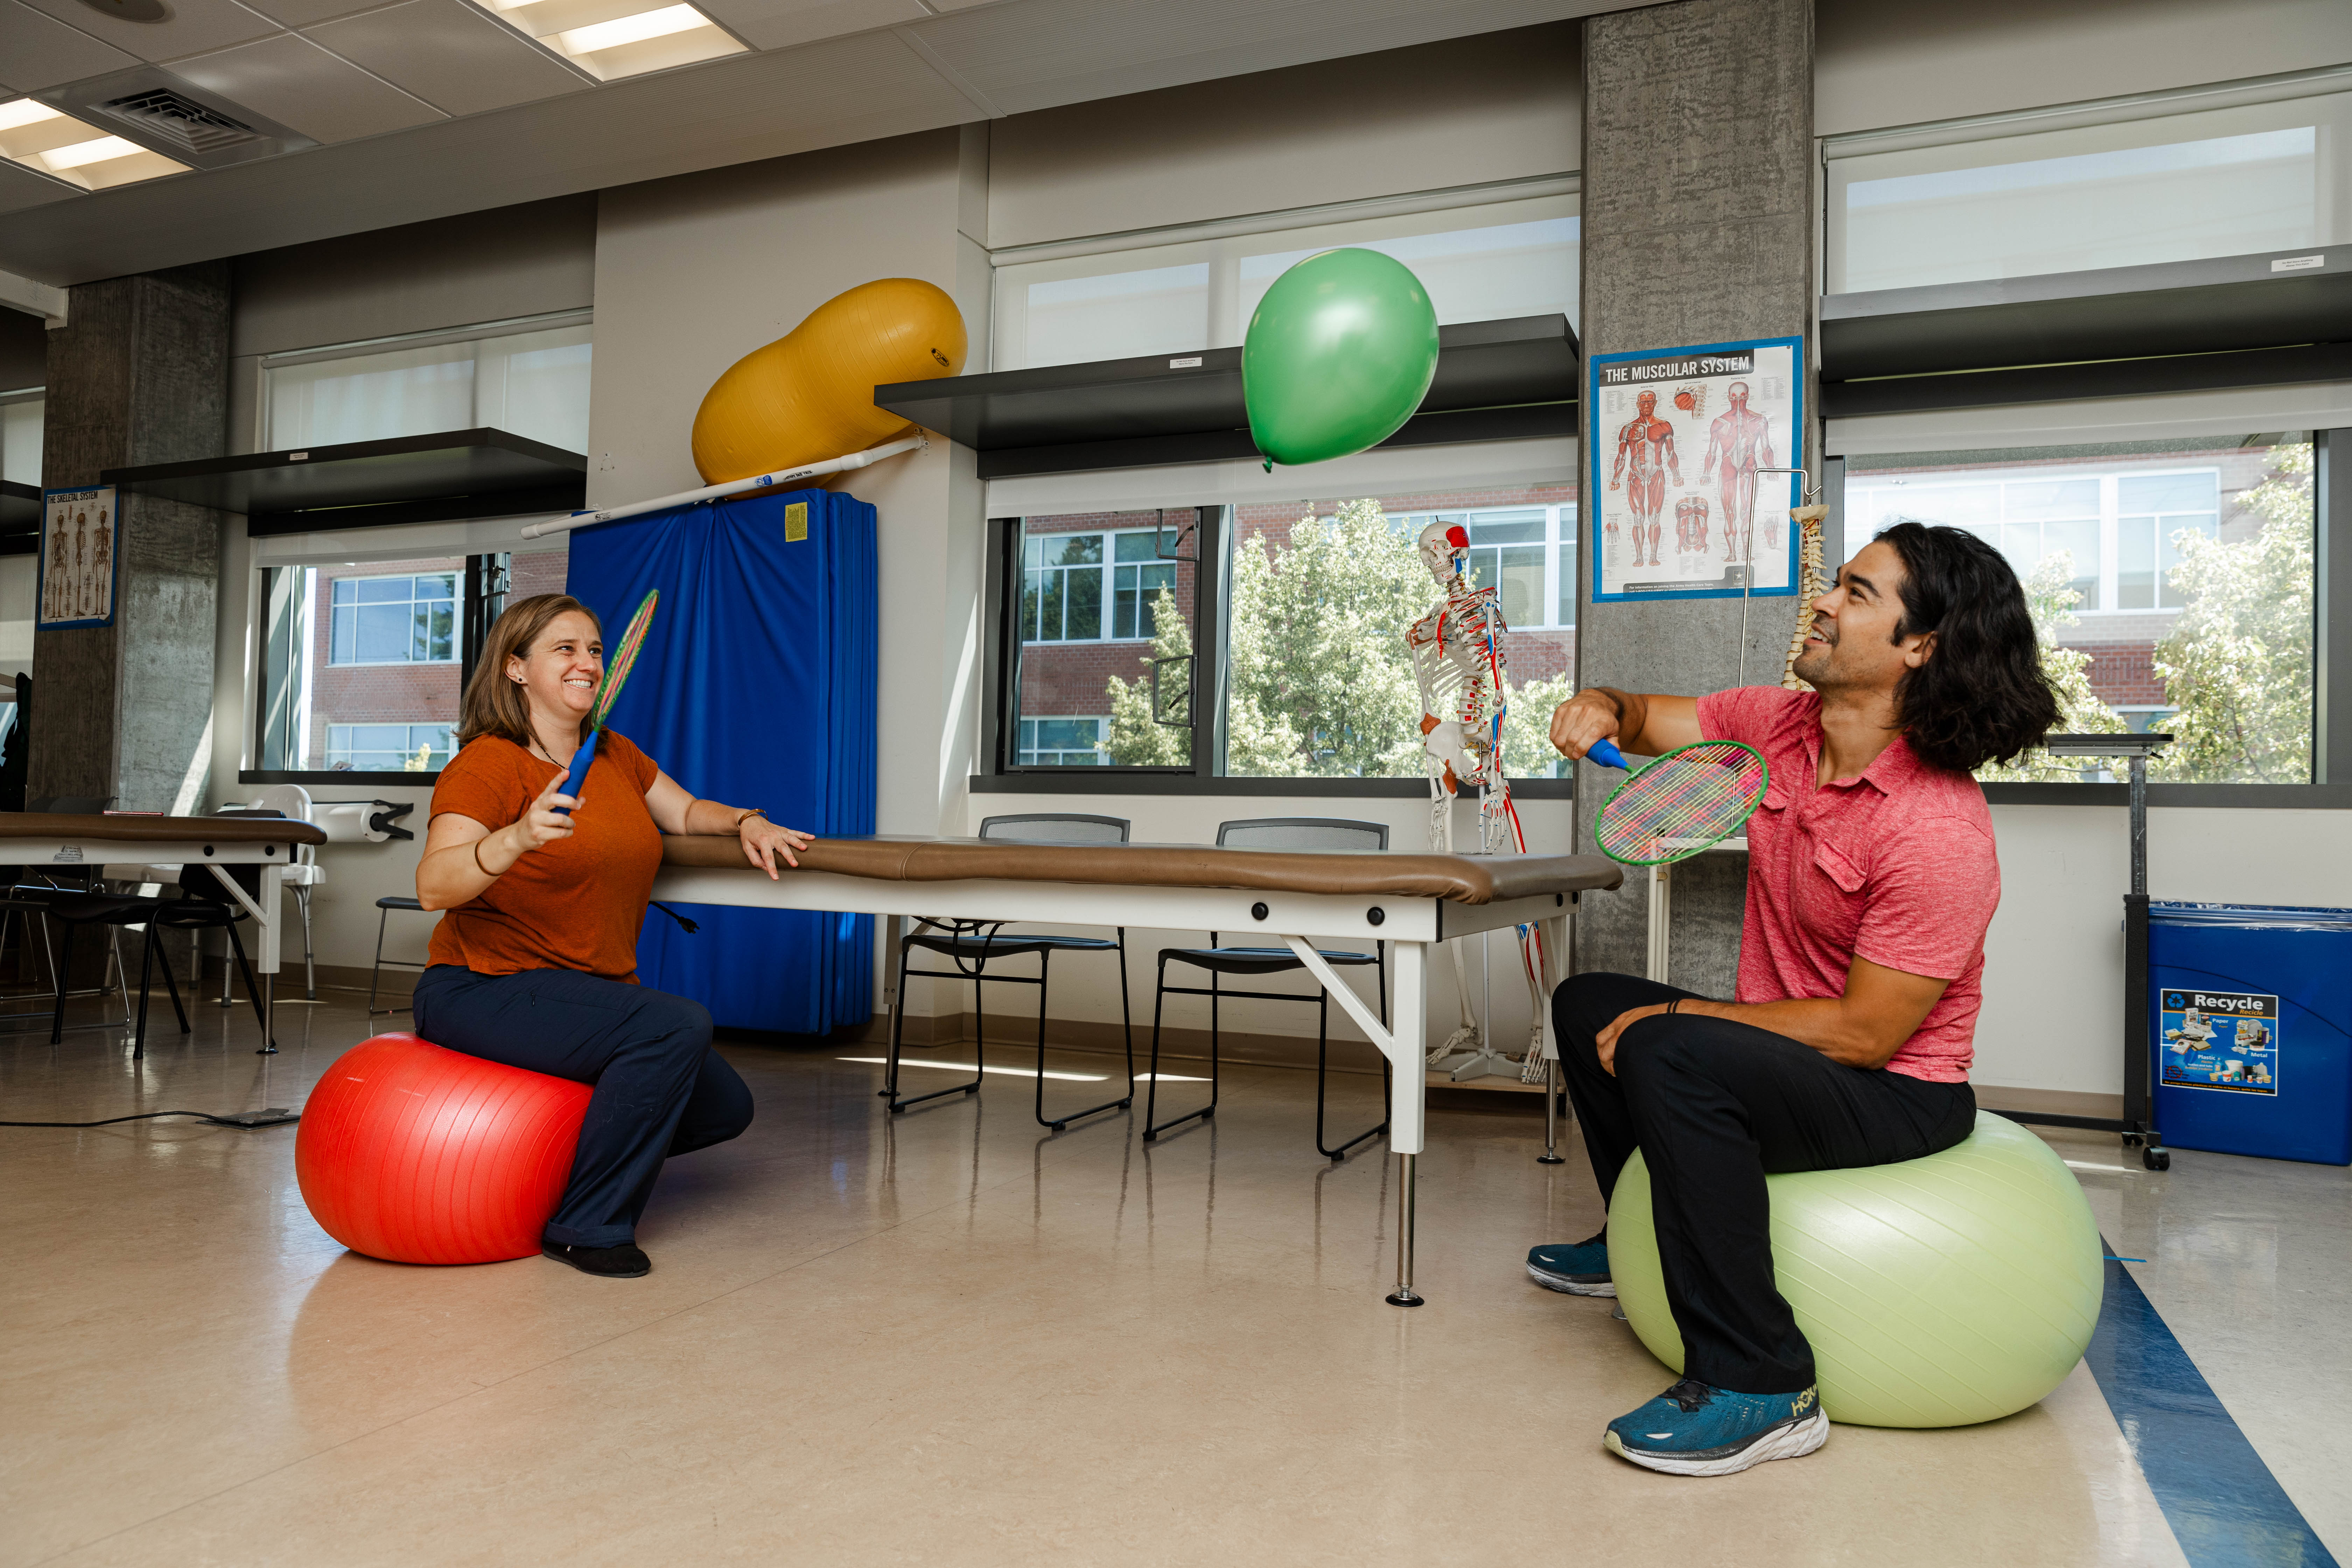 Two occupational therapy students demonstrate a common therapy exercise using balloons.